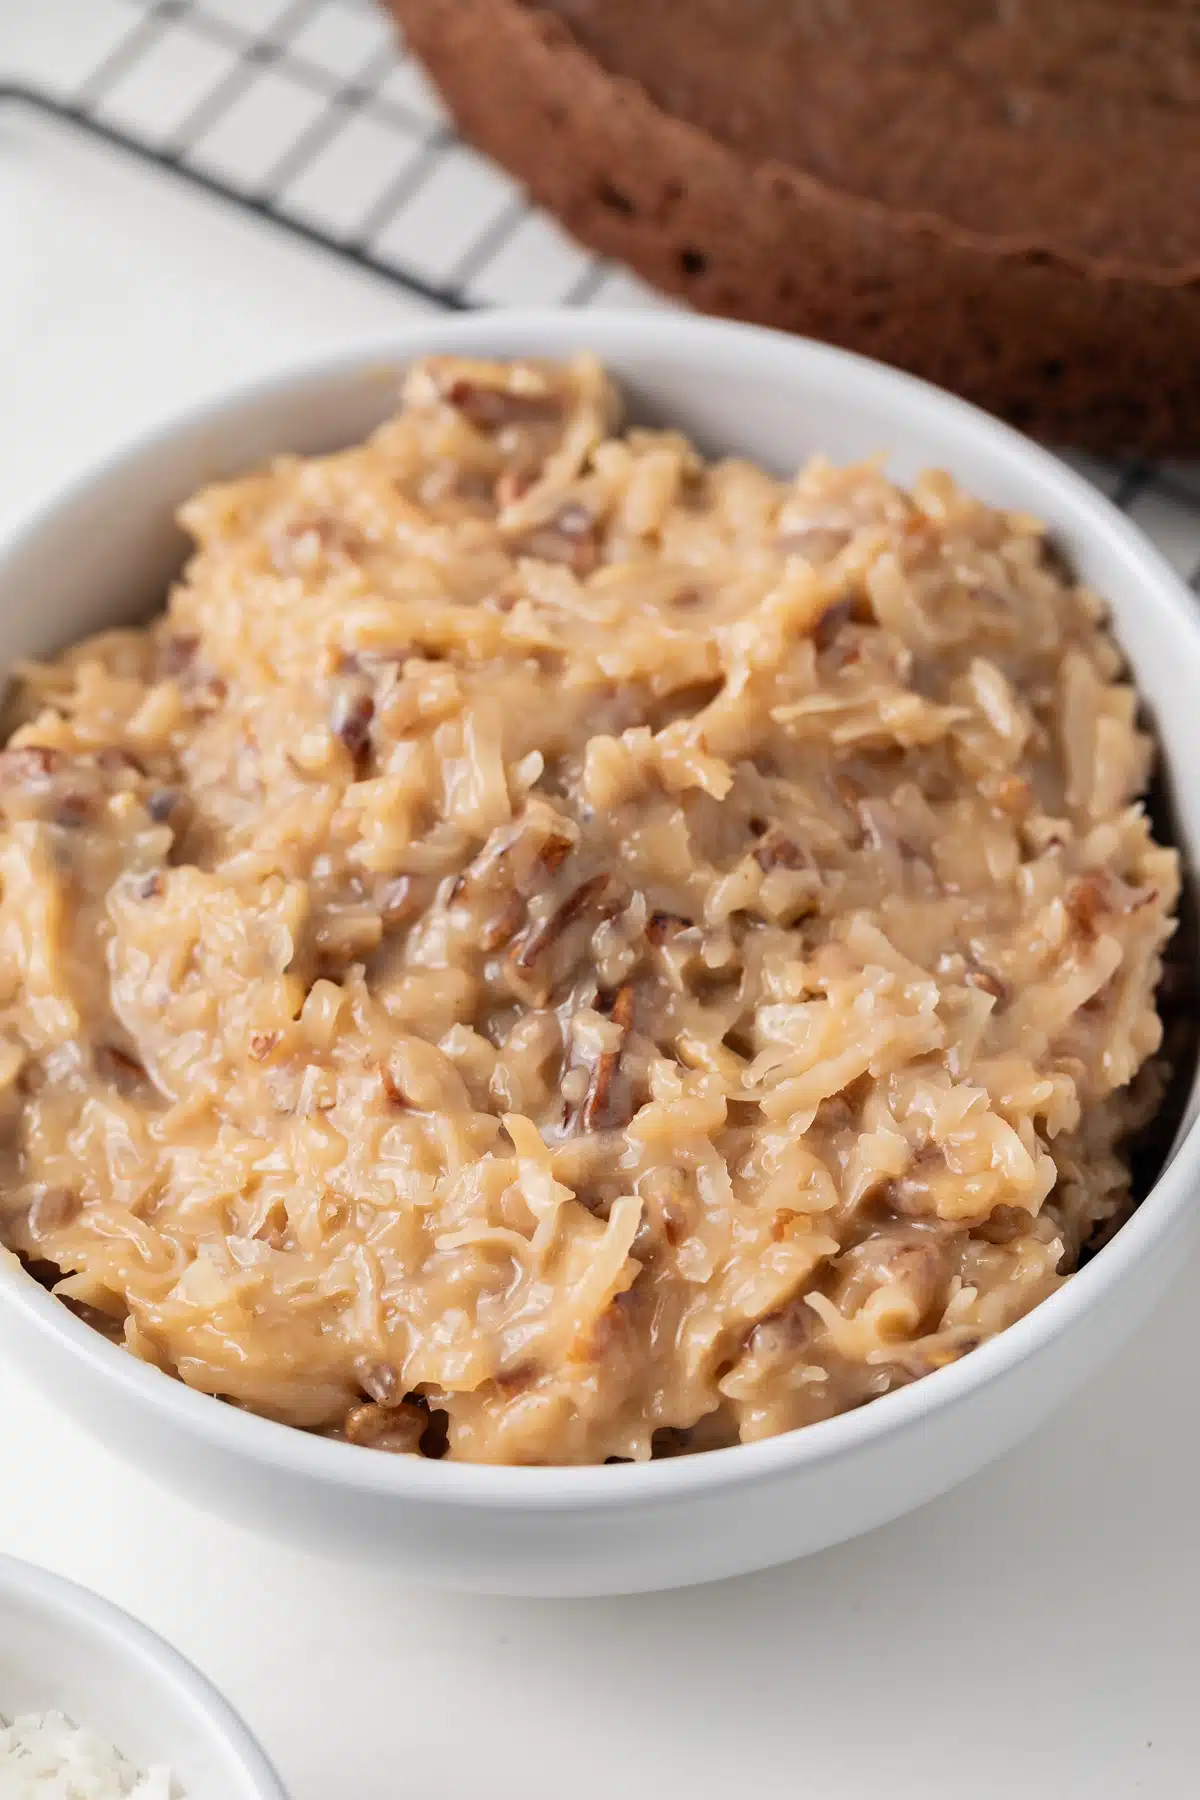 German chocolate cake frosting in white bowl.